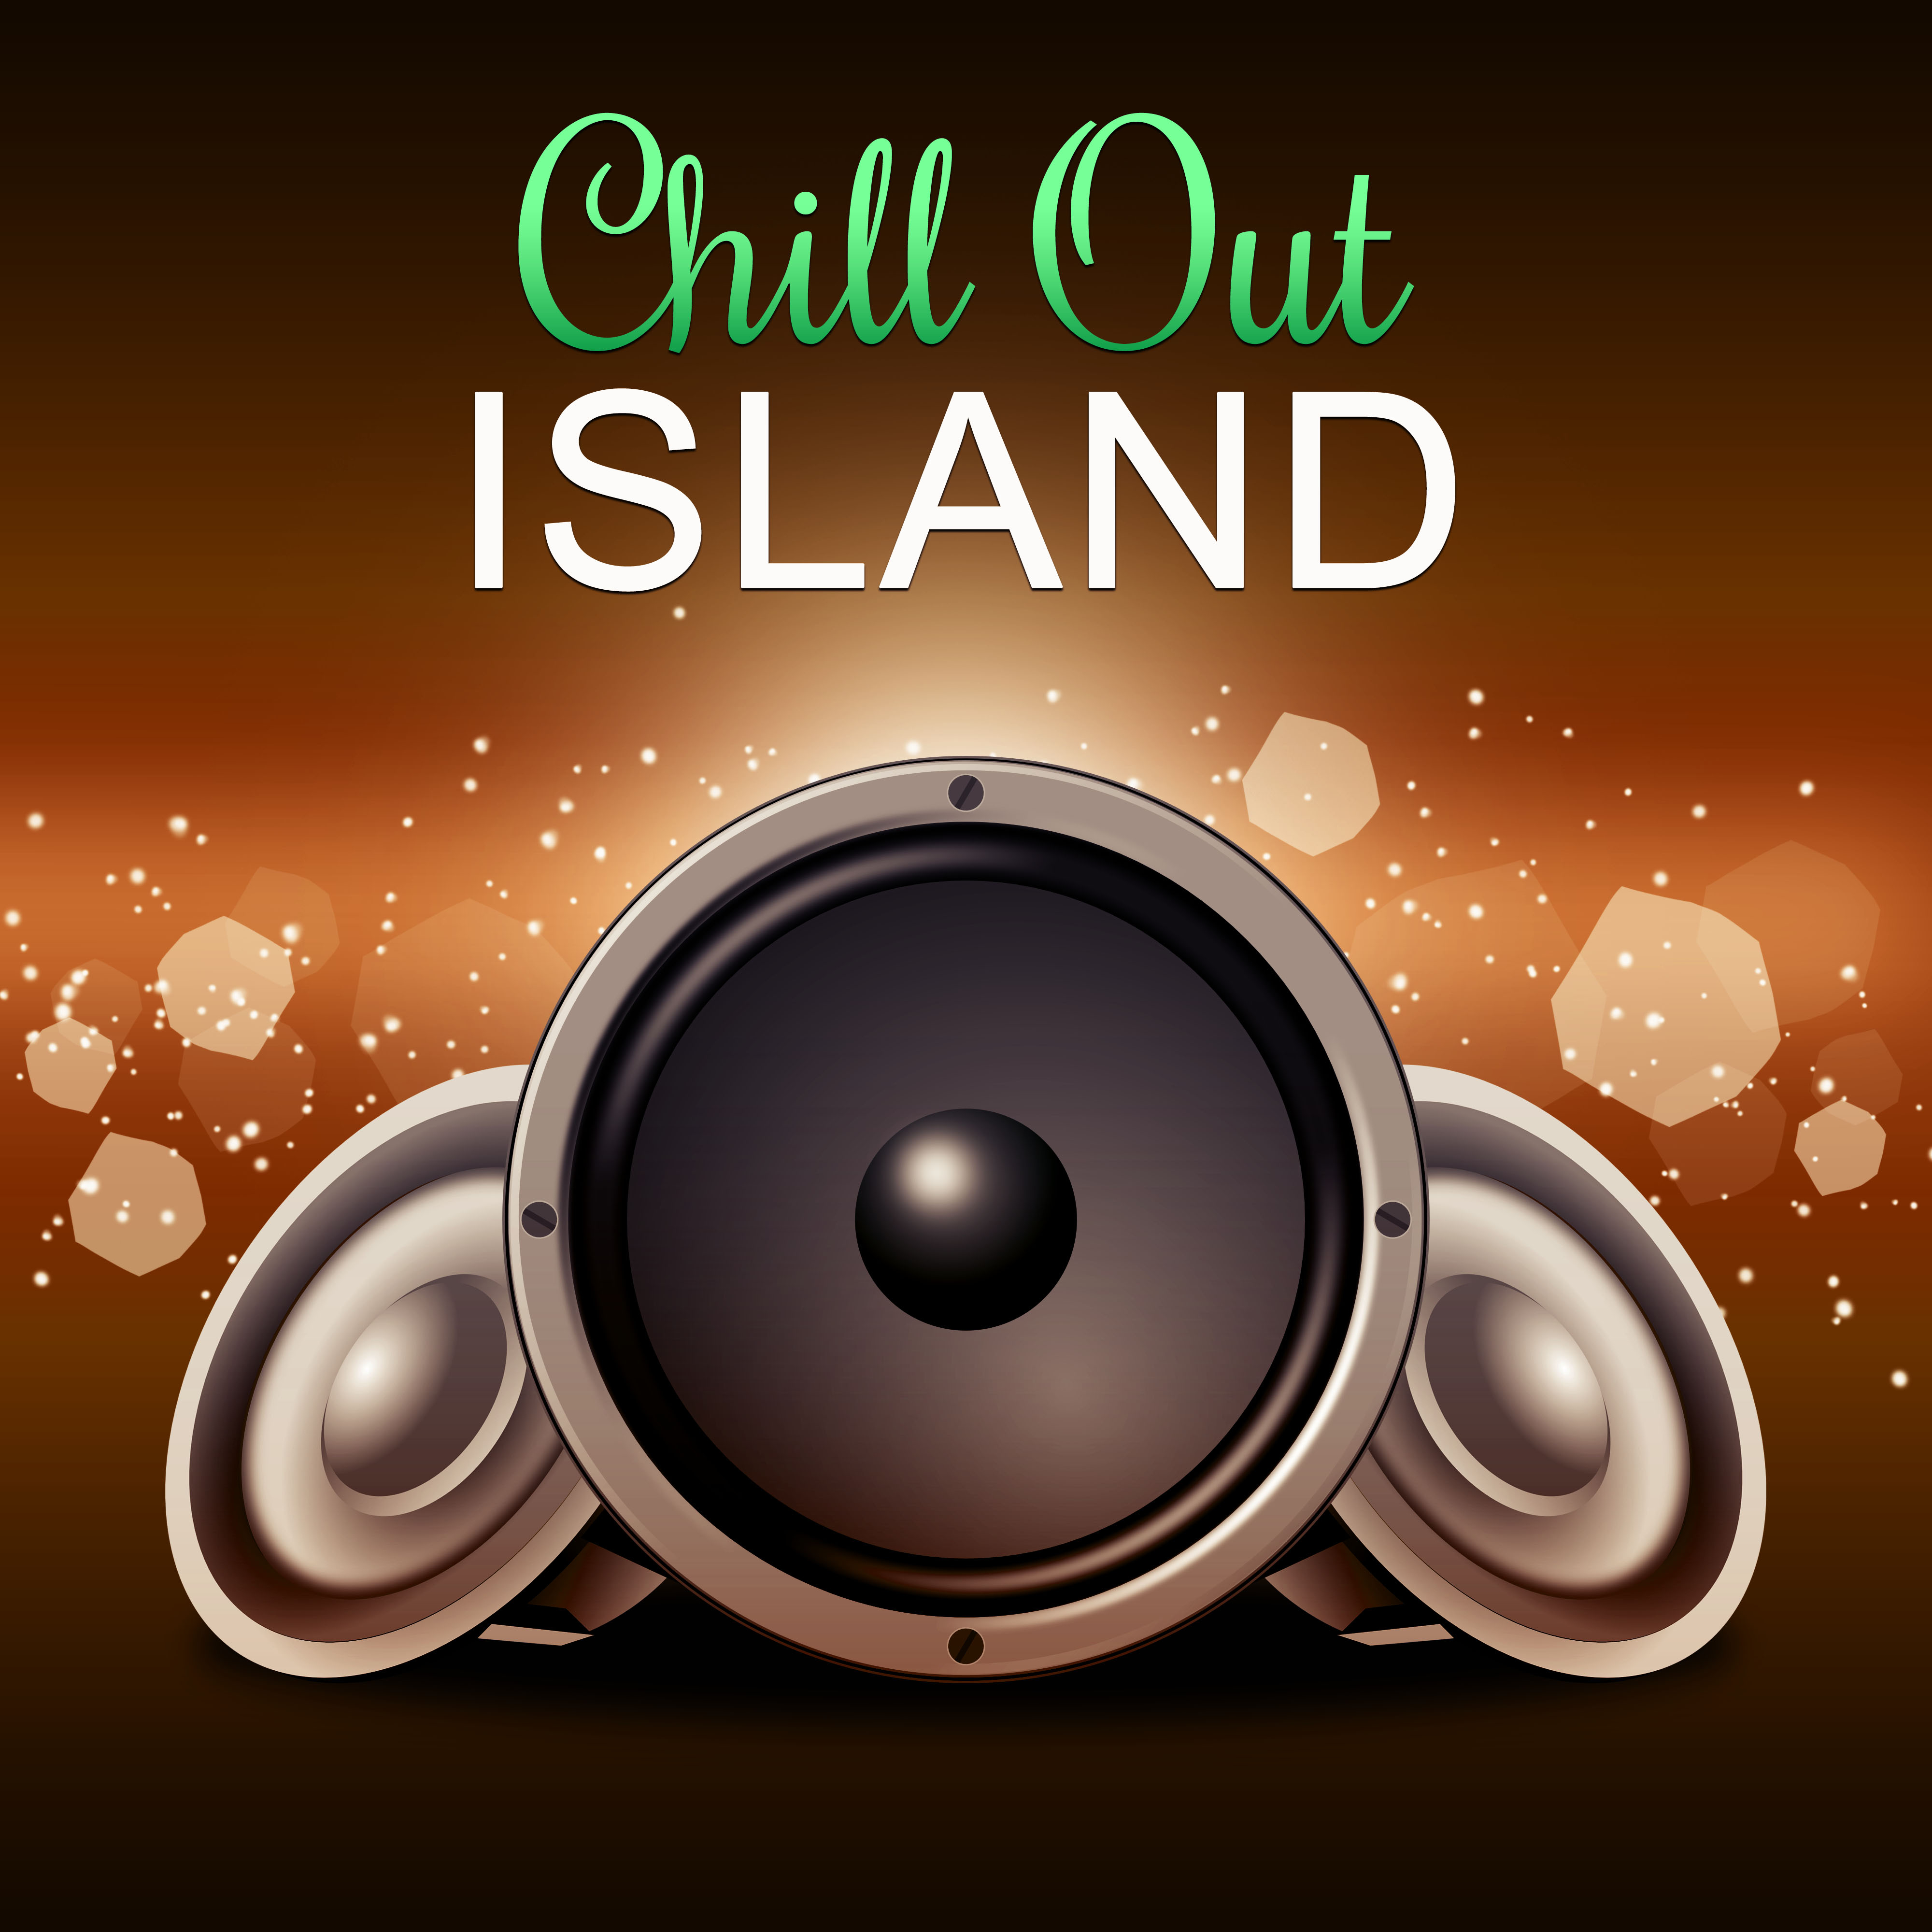 Chillout Island – Best Chill Out Music in the World, Chillout Vibes, Positive Energy